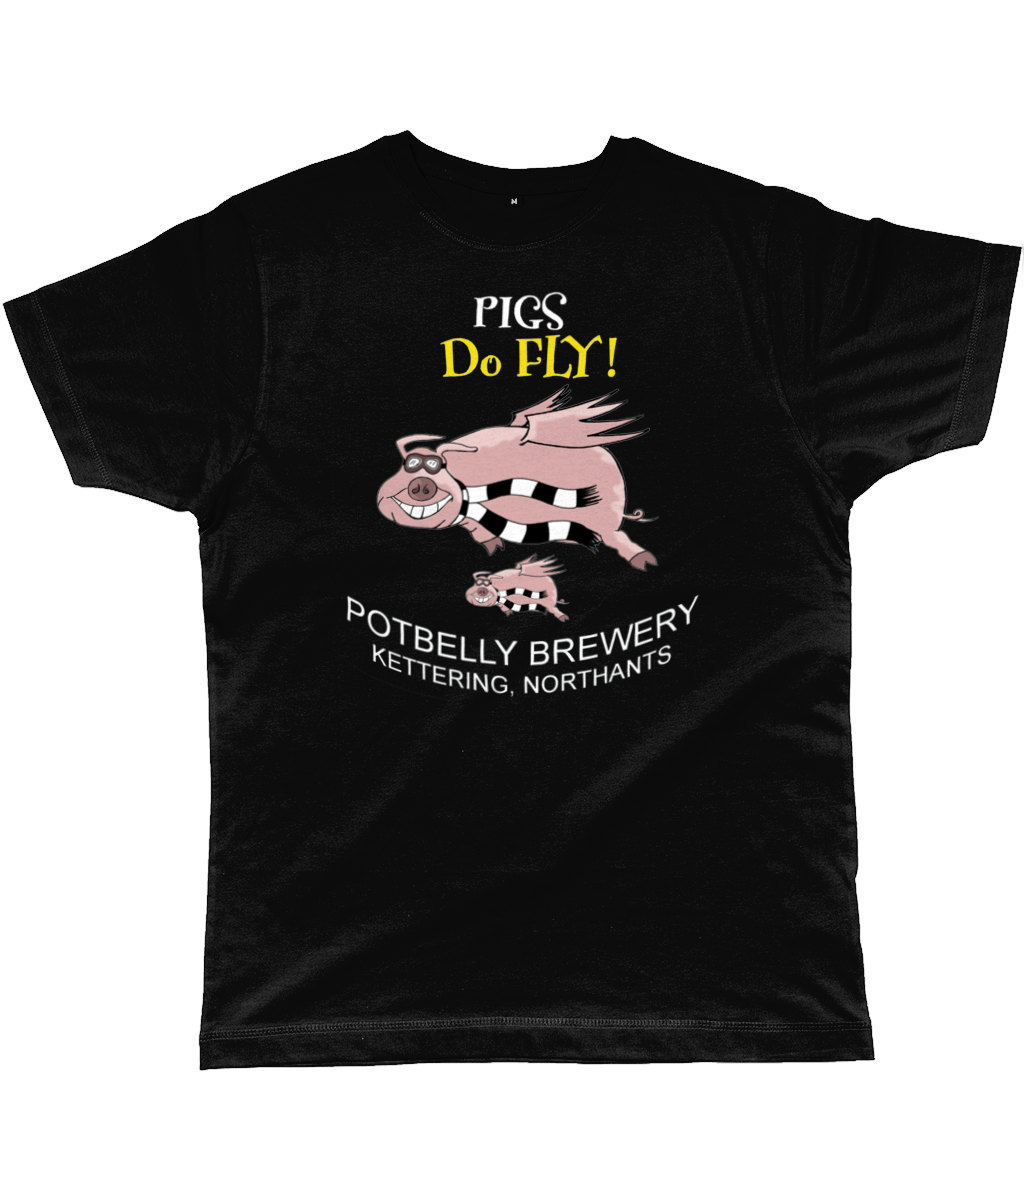 Potbelly Brewery Pigs Do Fly Two Pigs Classic Cut Men's T-Shirt